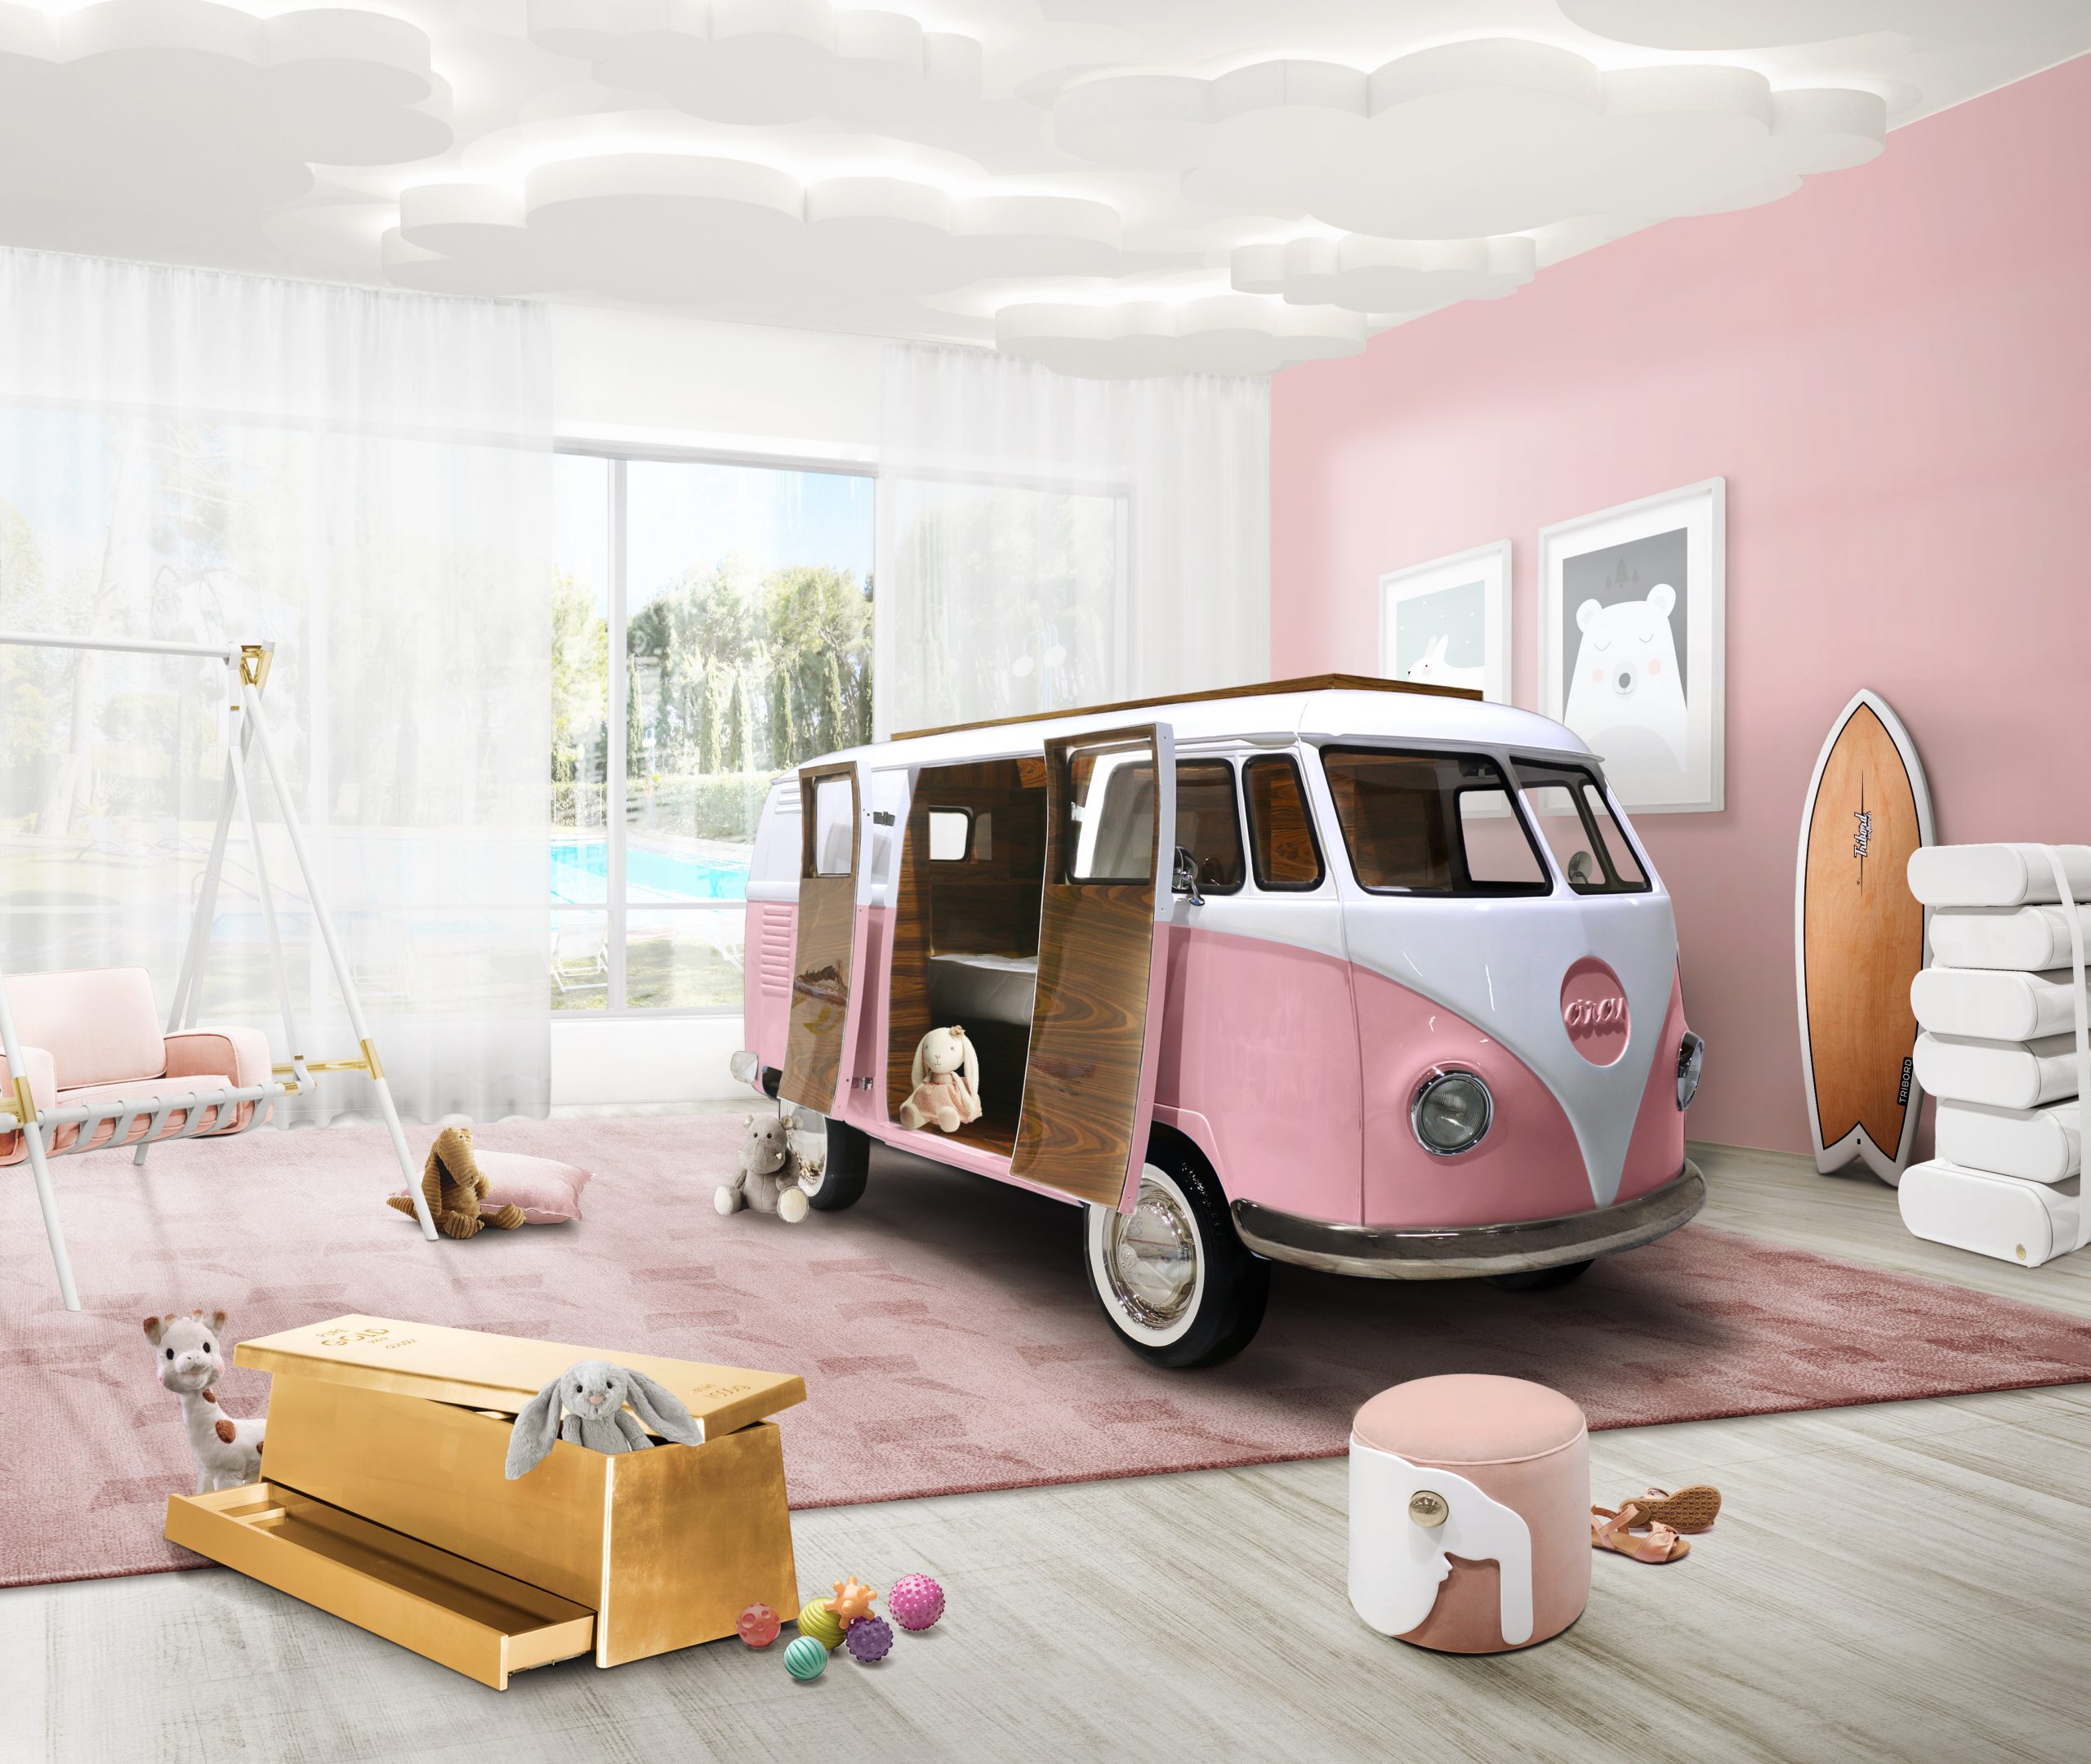 Be Inspired By These Wonderful Ambiances For Your Kid´s Bedroom